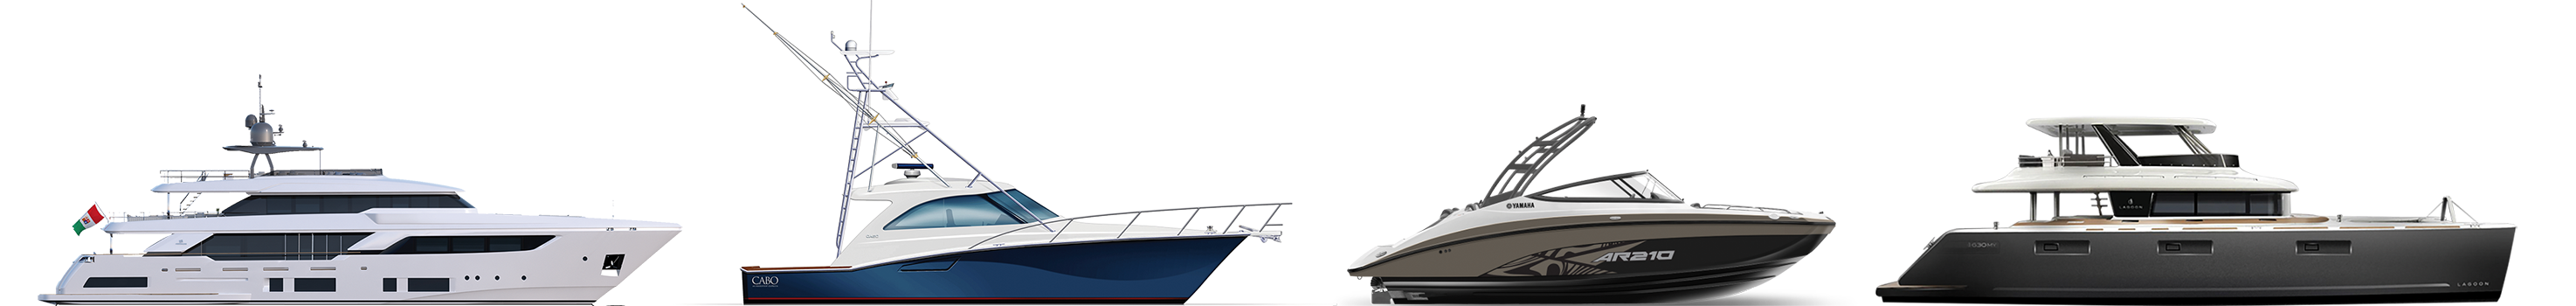 types of yachts